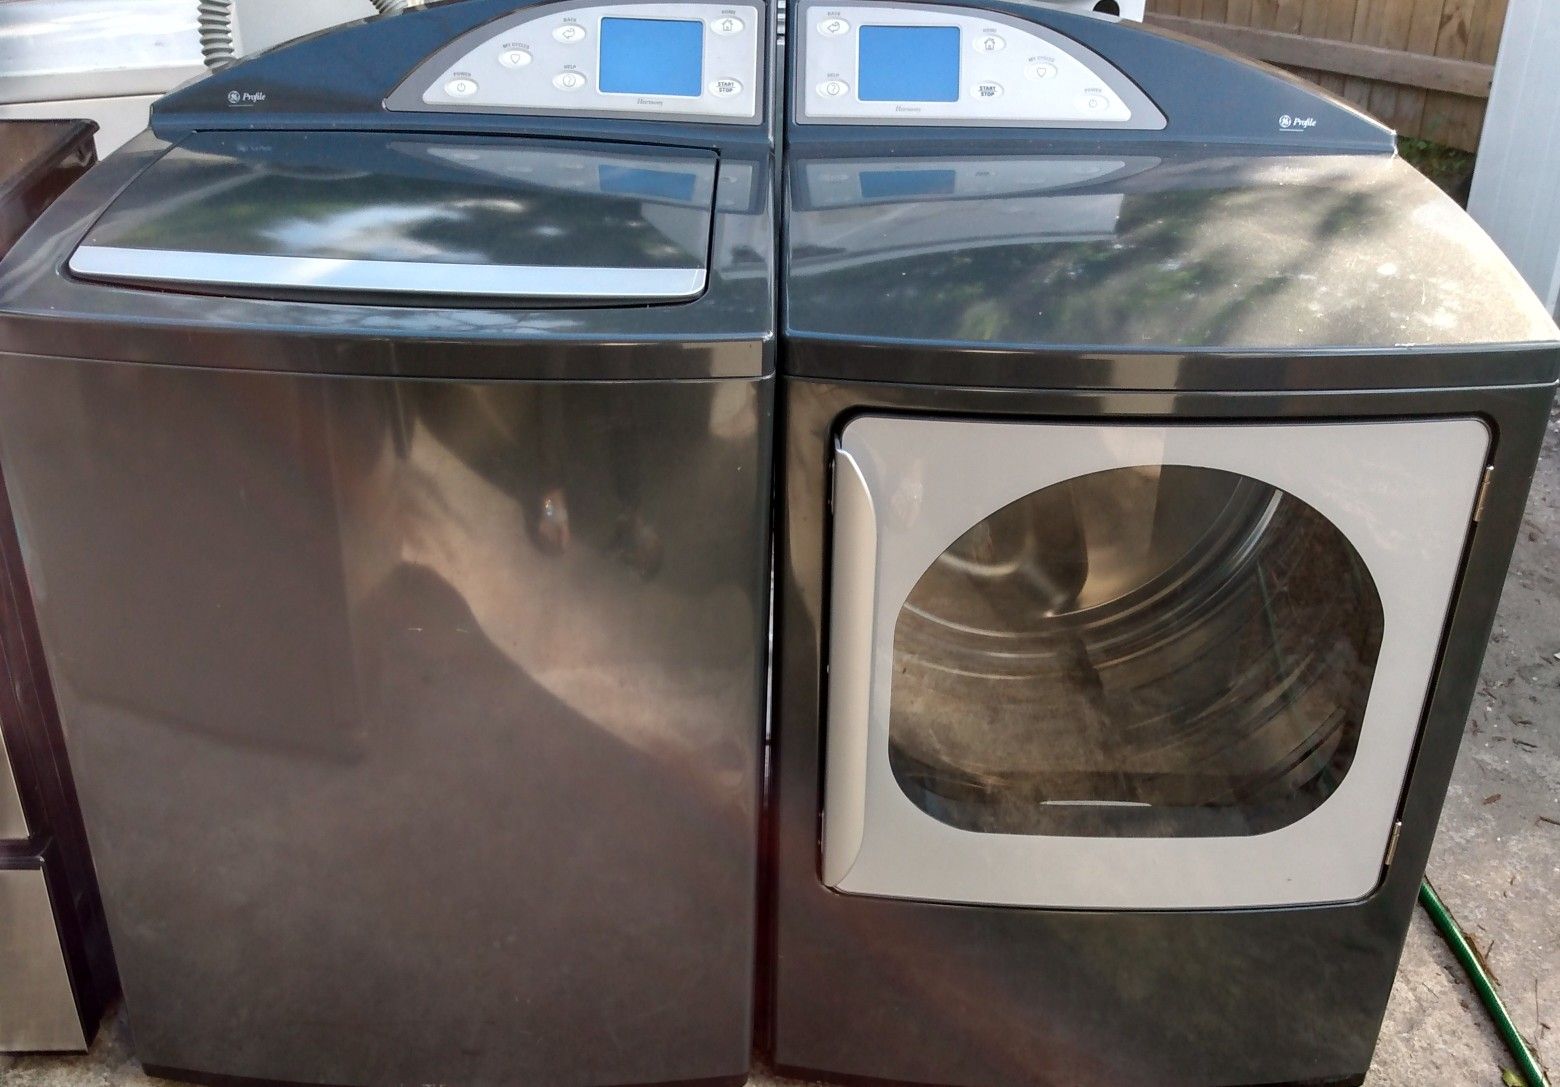 BEAUTIFUL GE PROFILE SUPER CAPACITY WASHER DRYER SET WITH STAINLESS STEEL TUB AND NO AGITATOR